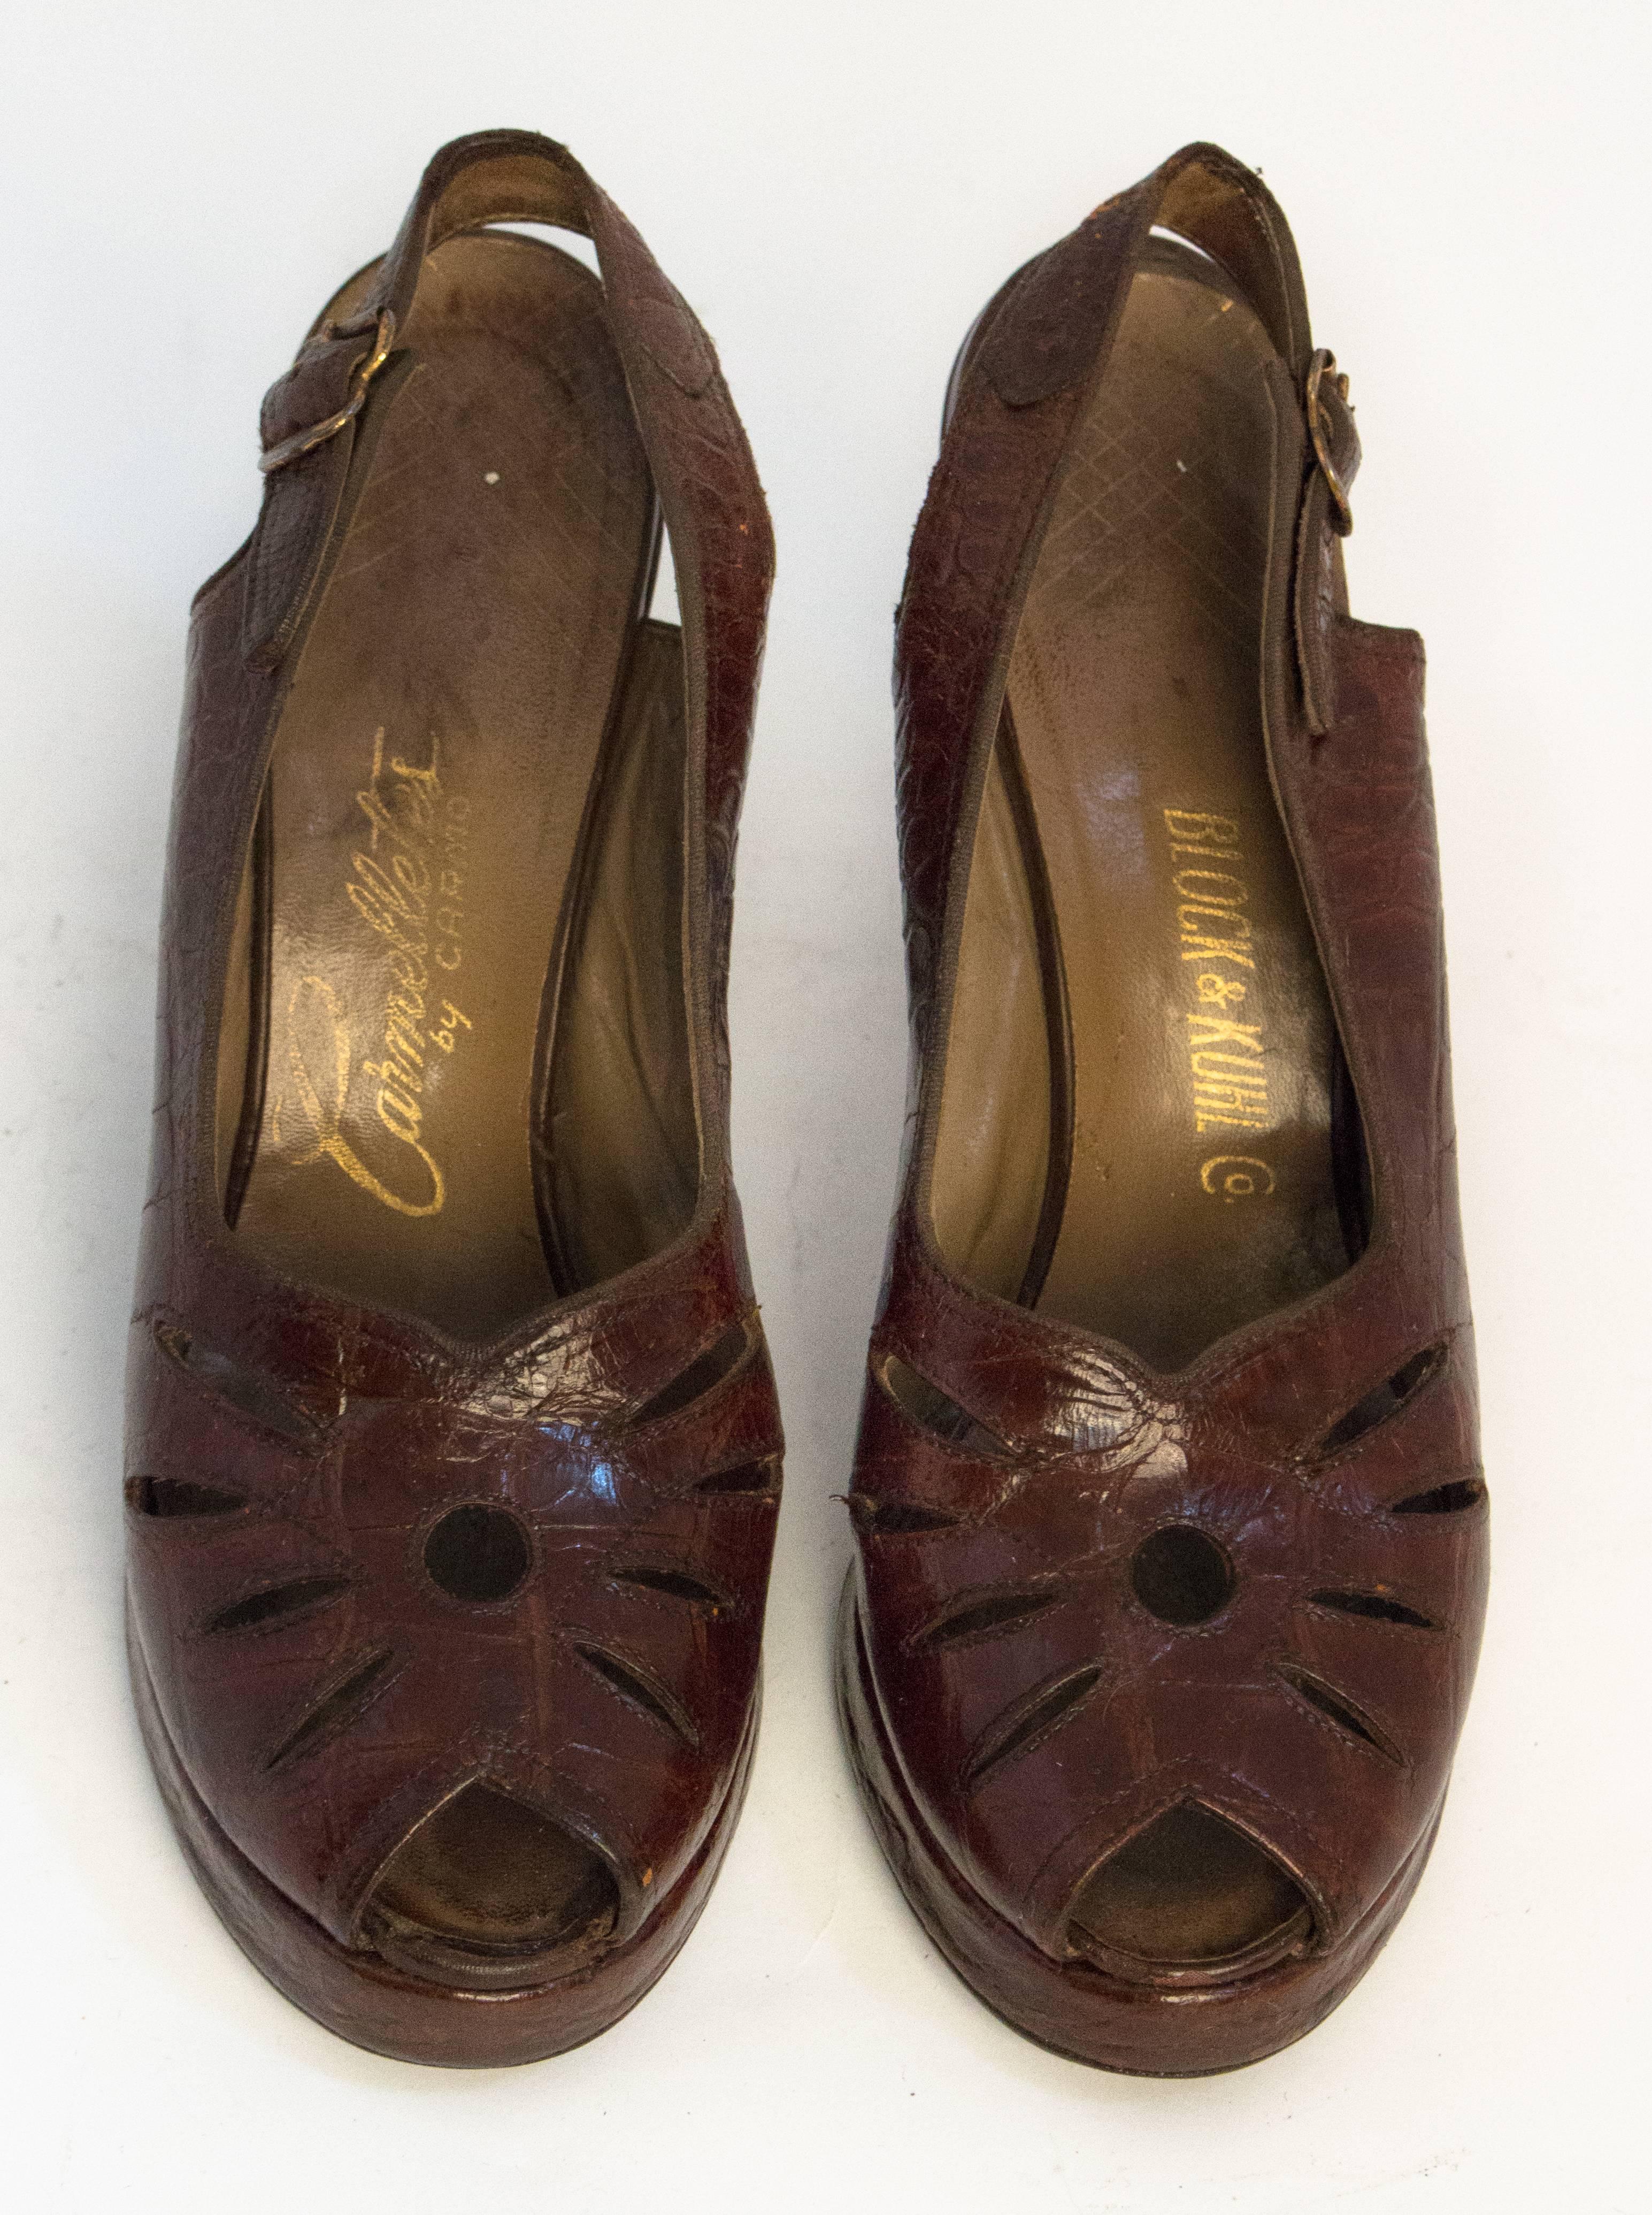 40s peep toe platforms. Cutouts on toe tops. Leather soles. 

Measurements
Insole: 9 1/2